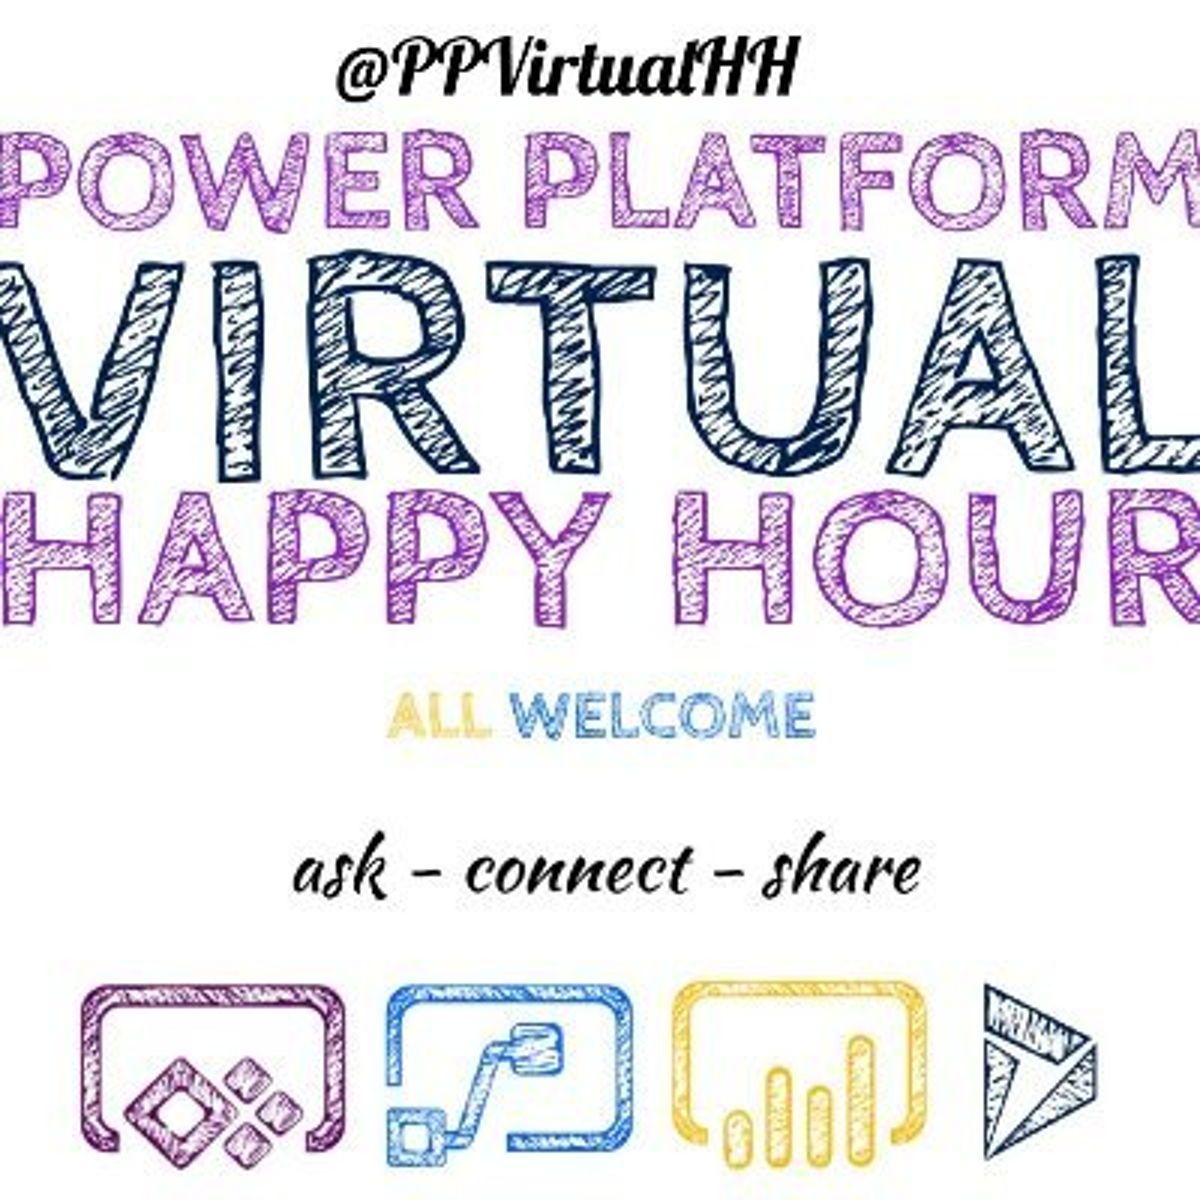 Our final guest for the May #PPVirtualHH is the winner of the #Hack4GoodMBAS @yashagarwal1651 
Yash is showing us the award-winning #PowerPlatform solution & providing more insight into how his #TeamBTD developed the app

Wednesday 20th, 7pm BST

buff.ly/2AhdfYR